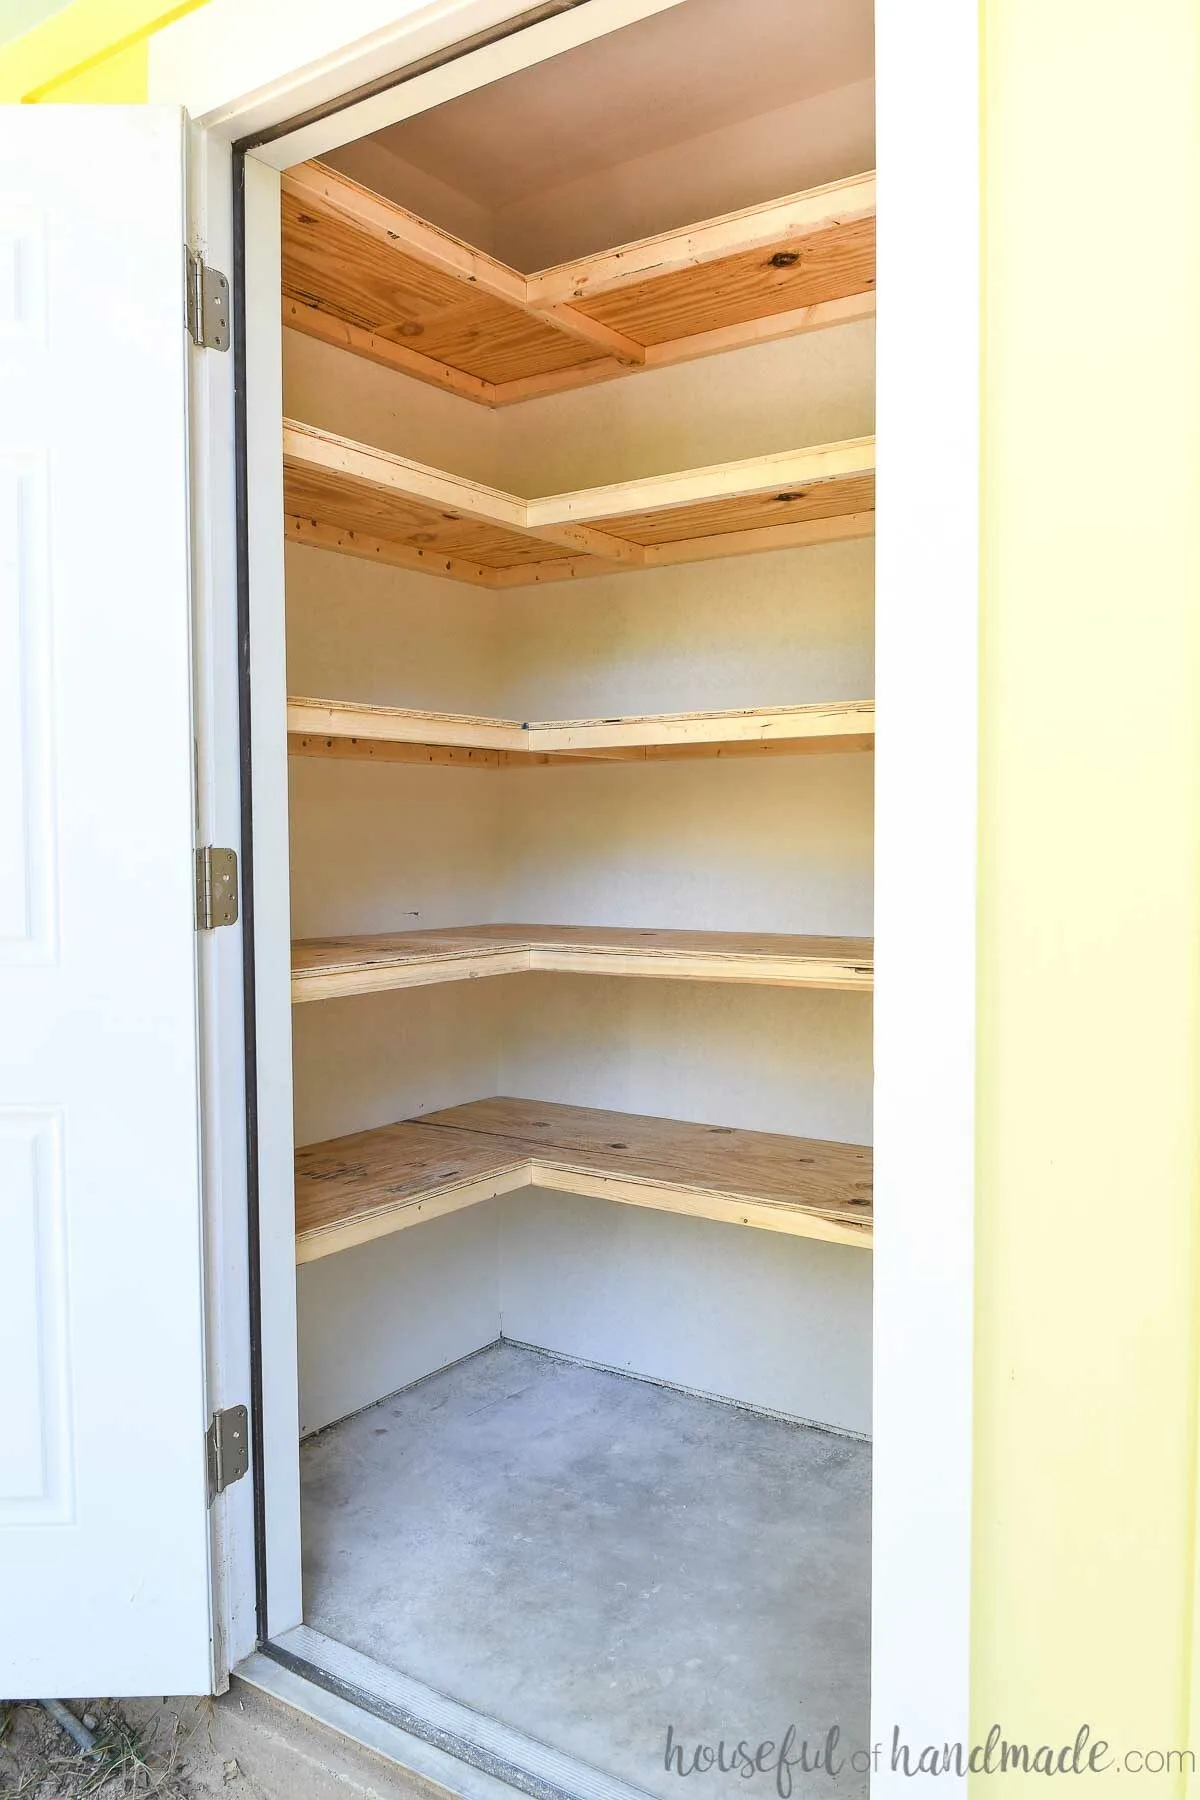 Outdoor storage closet with 5 storage shelves in an L shape. 